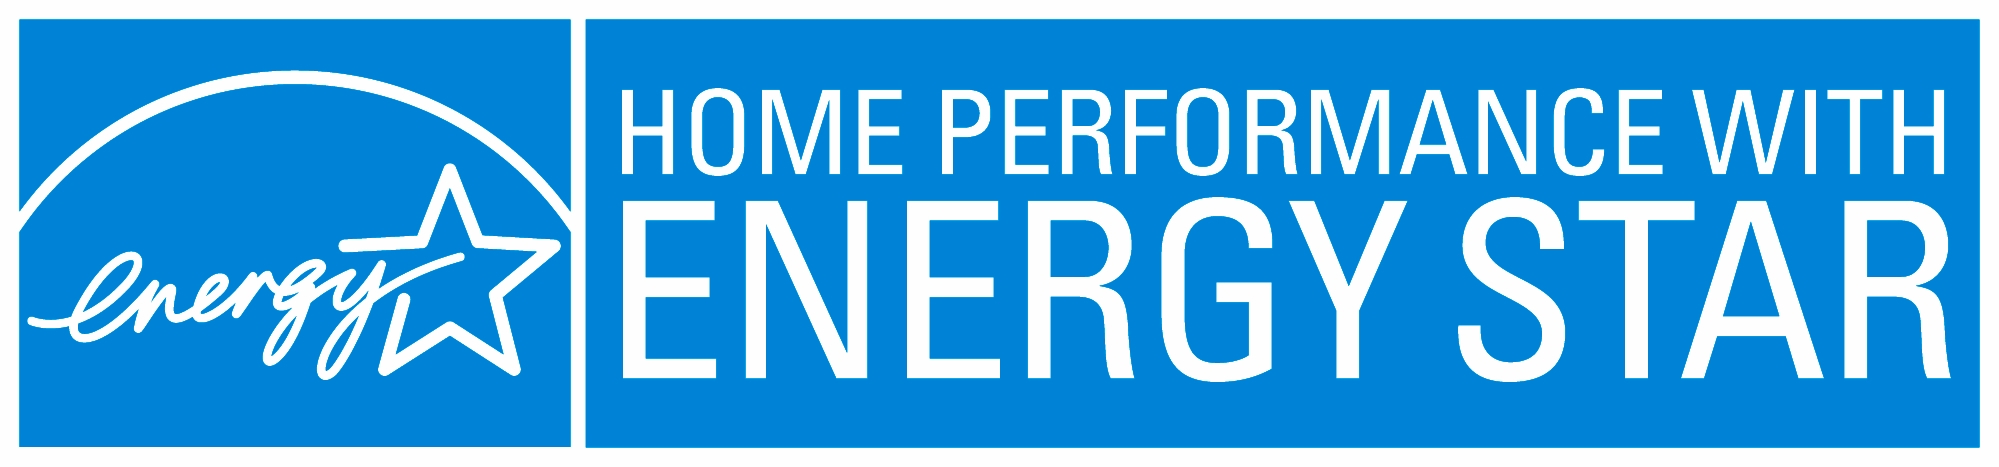 Home Winter-Ready with ENERGY STAR